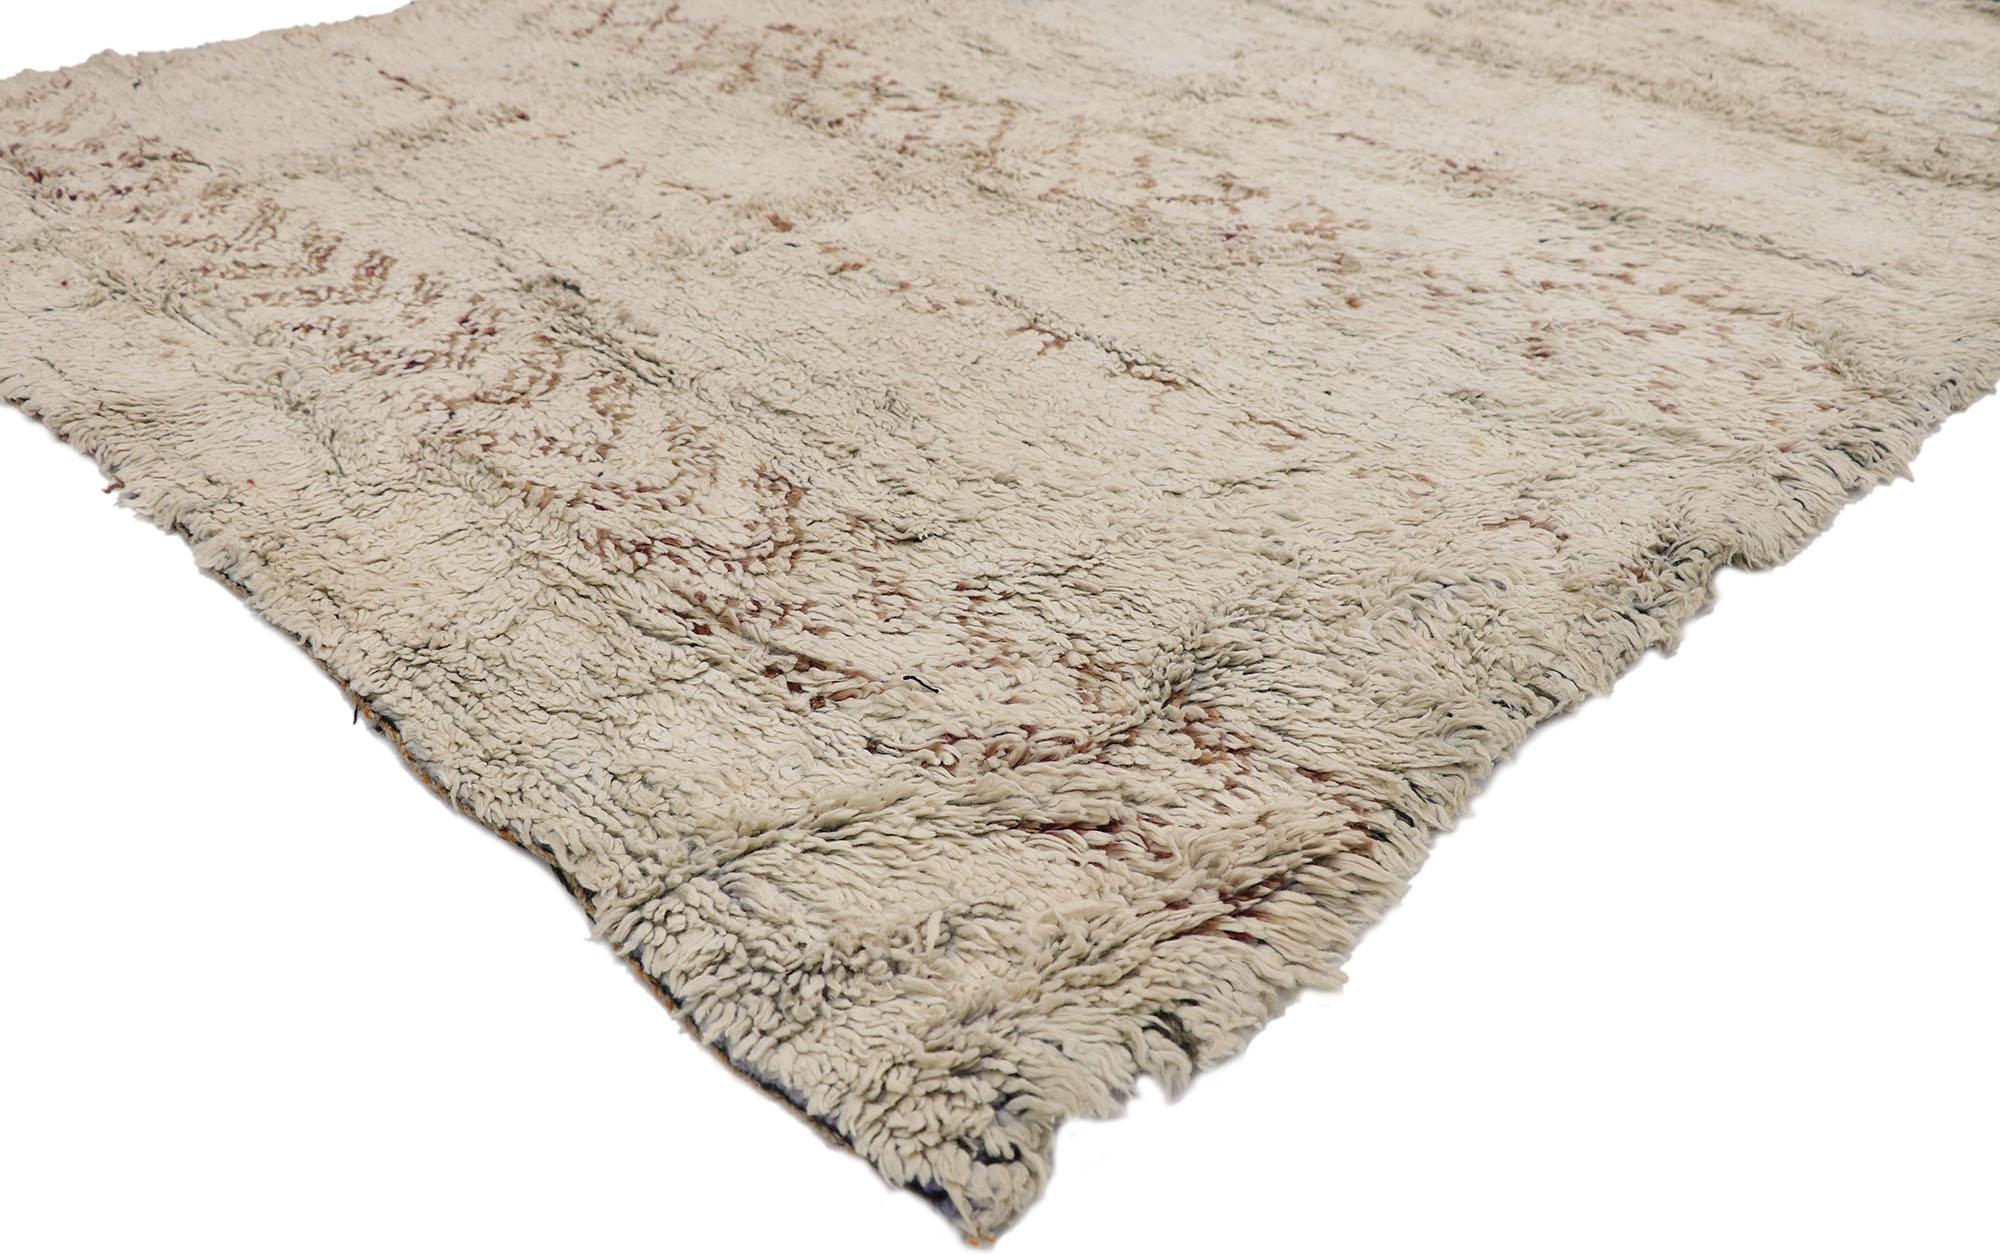 21427 Vintage Moroccan Rug, 05'06 x 07'02.
Nomadic charm meets relaxed familiarity in this hand knotted wool vintage Moroccan rug. The faded tribal design and neutral colorway woven into this piece work together creating a curated yet laid back